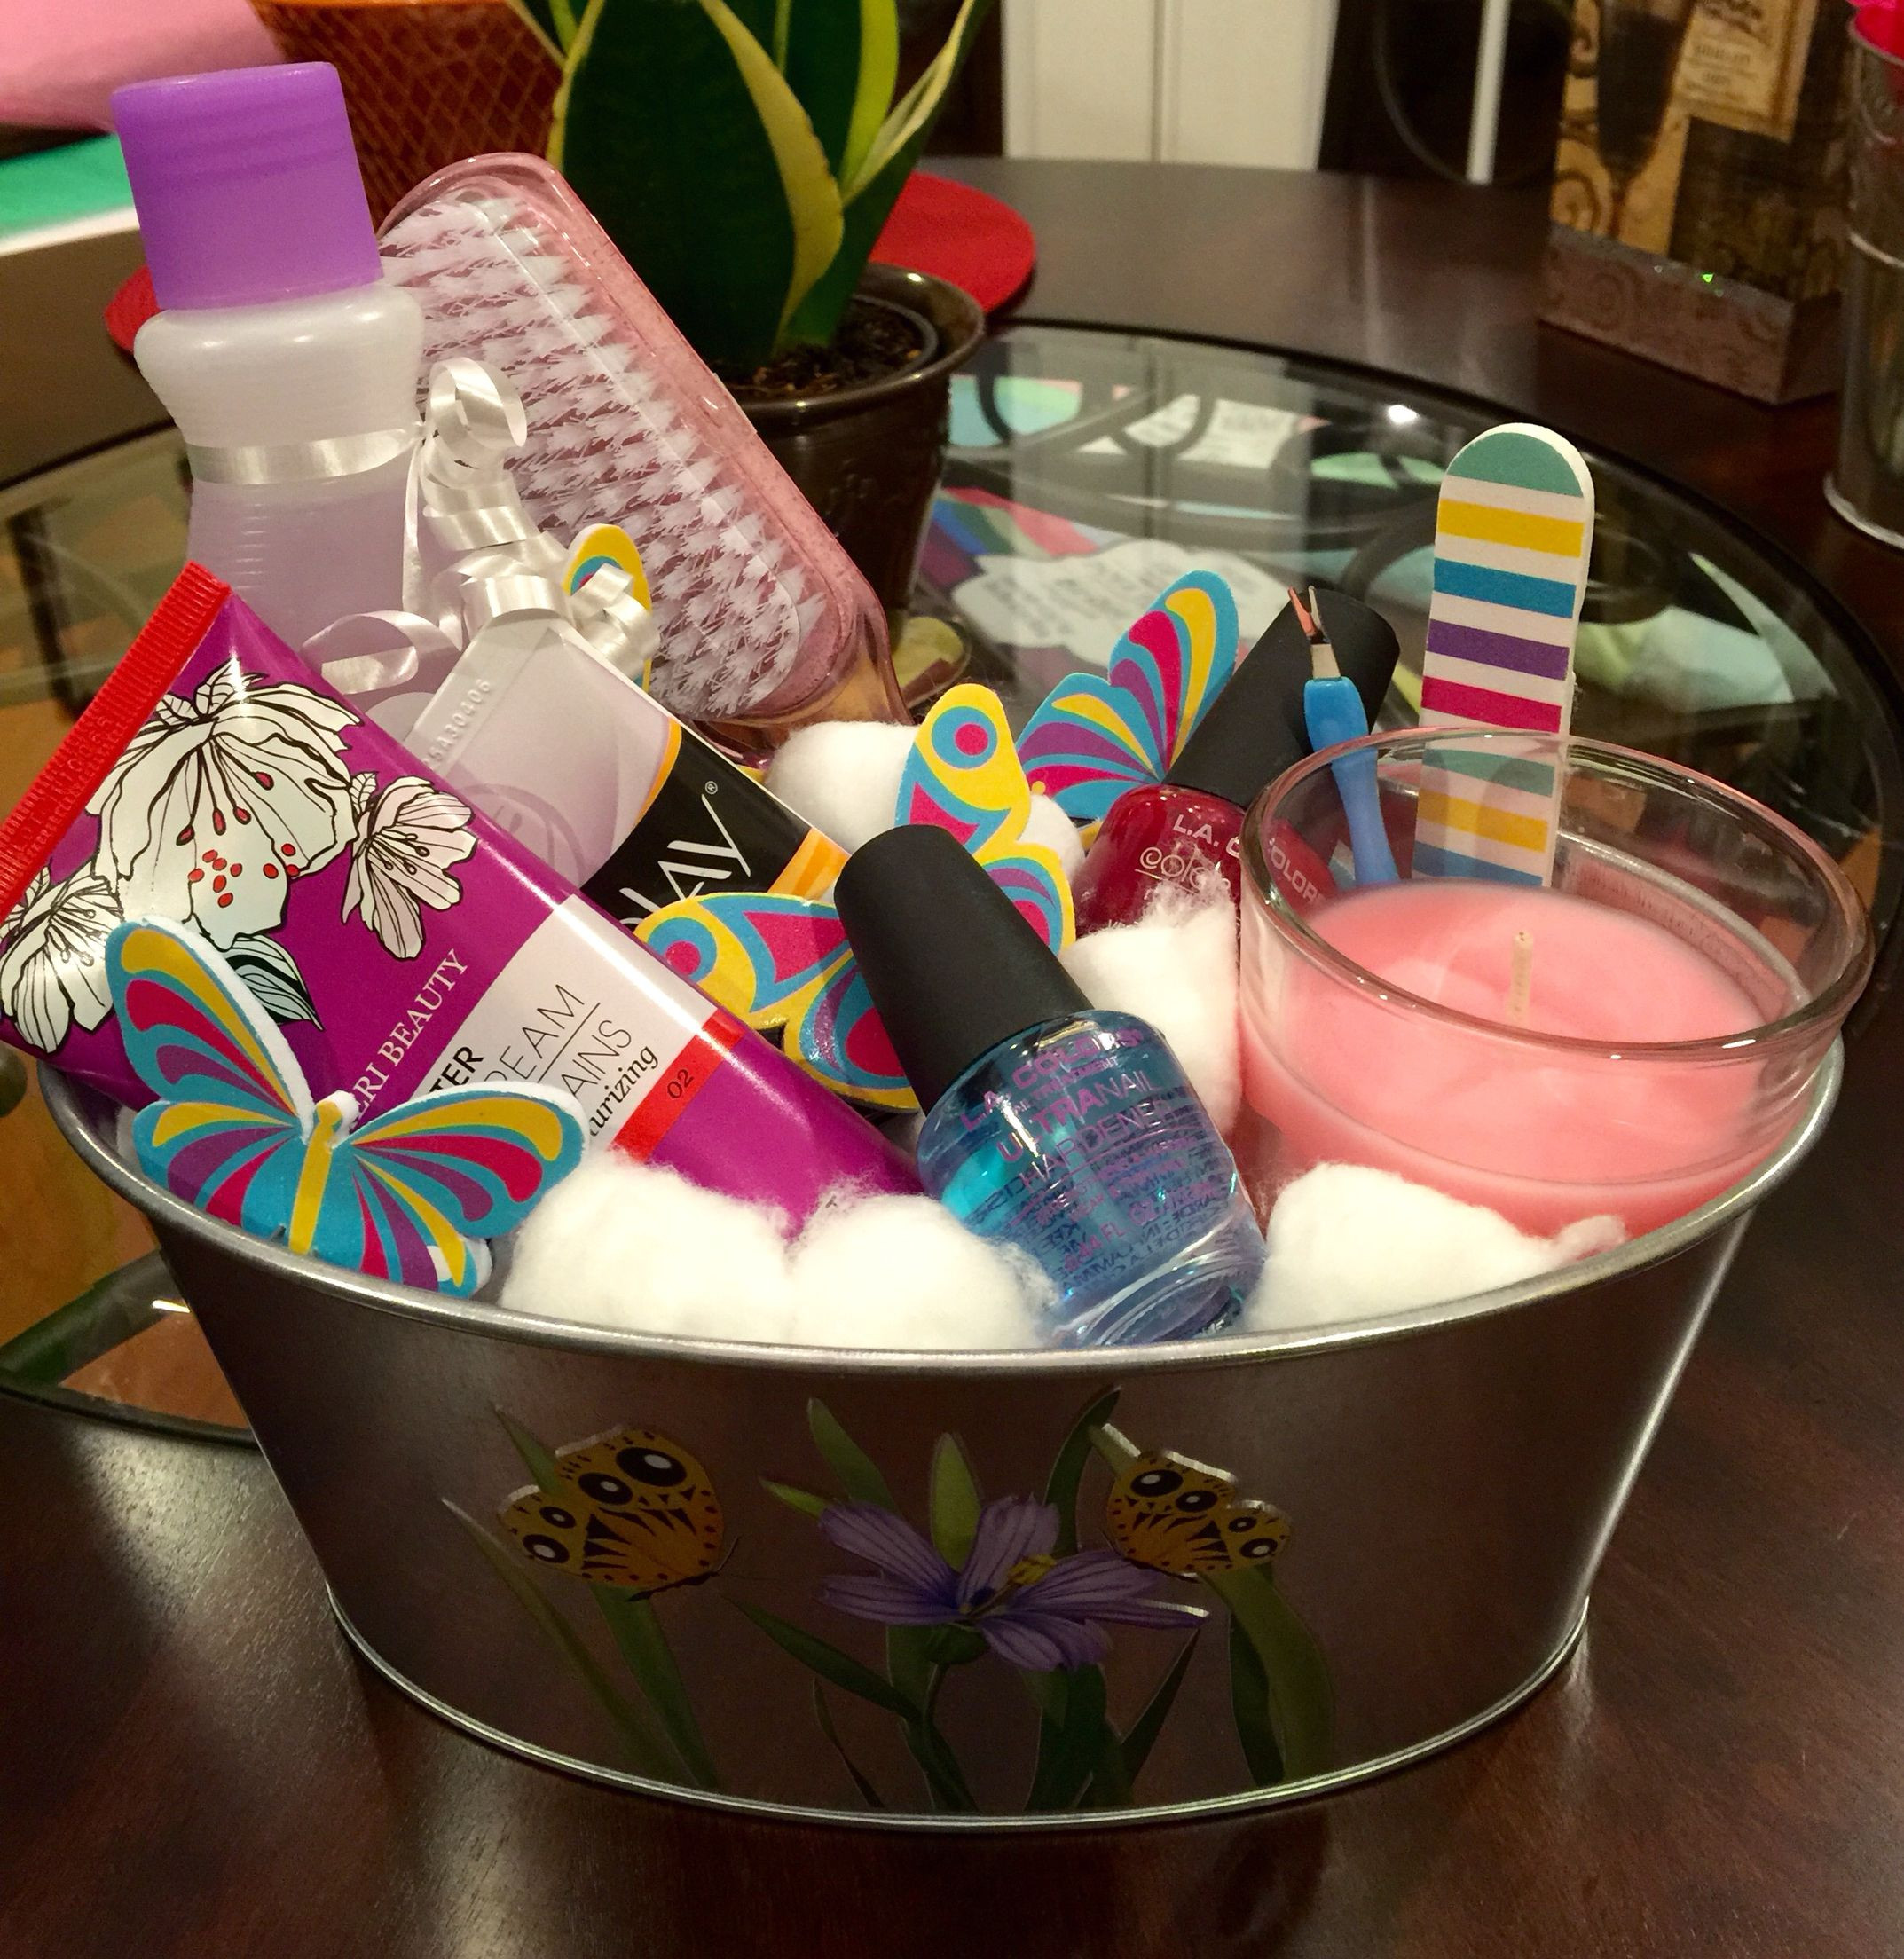 Manicure Gift Basket Ideas
 Nail spa t basket made by yours truly All items from